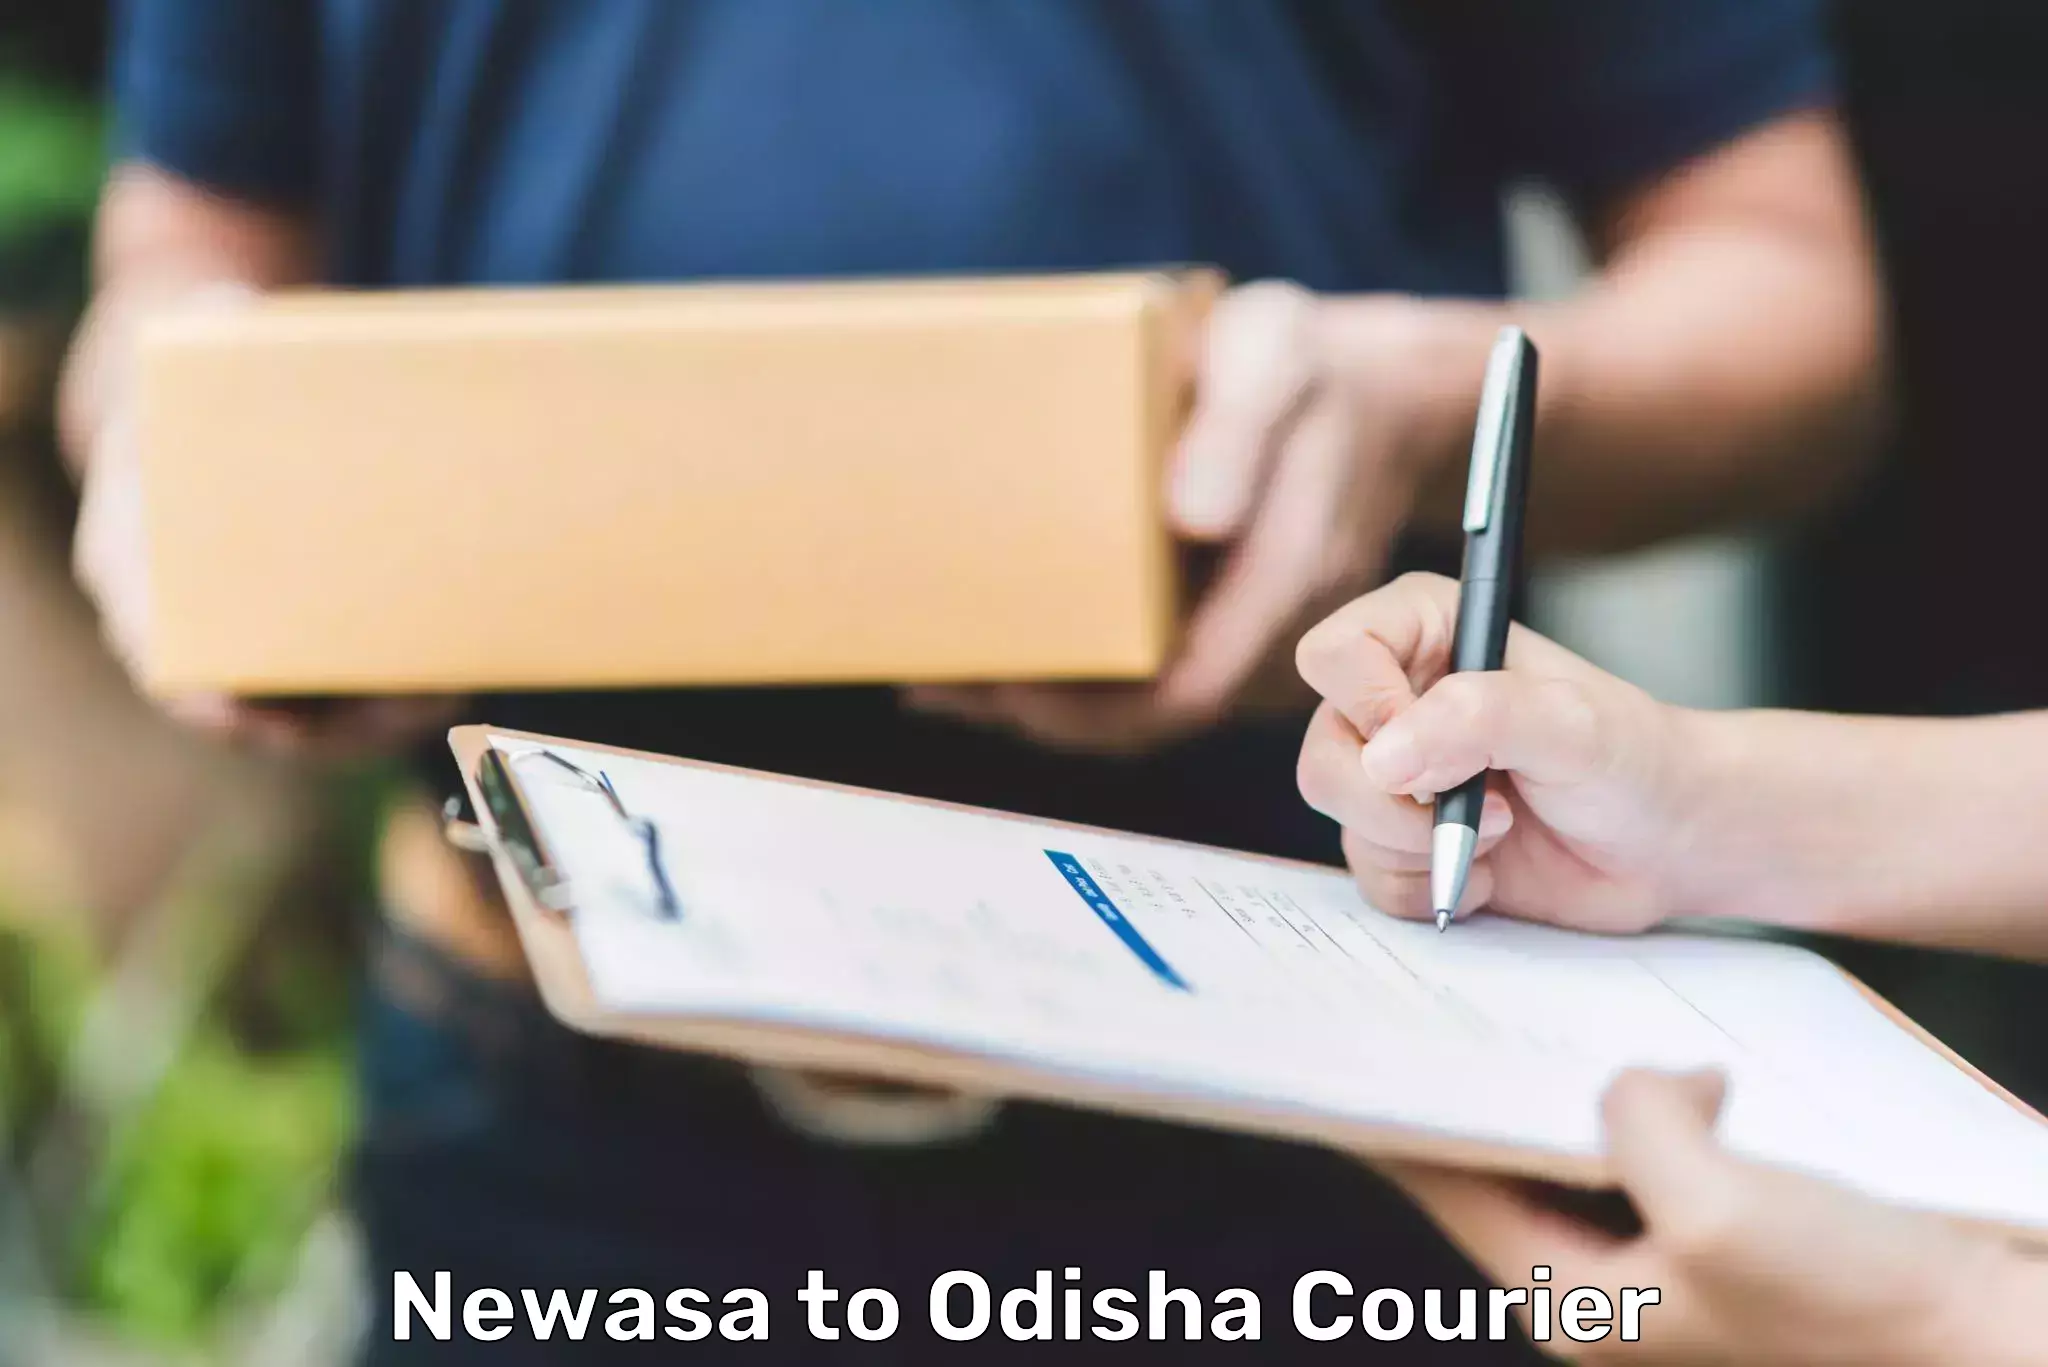 Local delivery service Newasa to Dandisahi